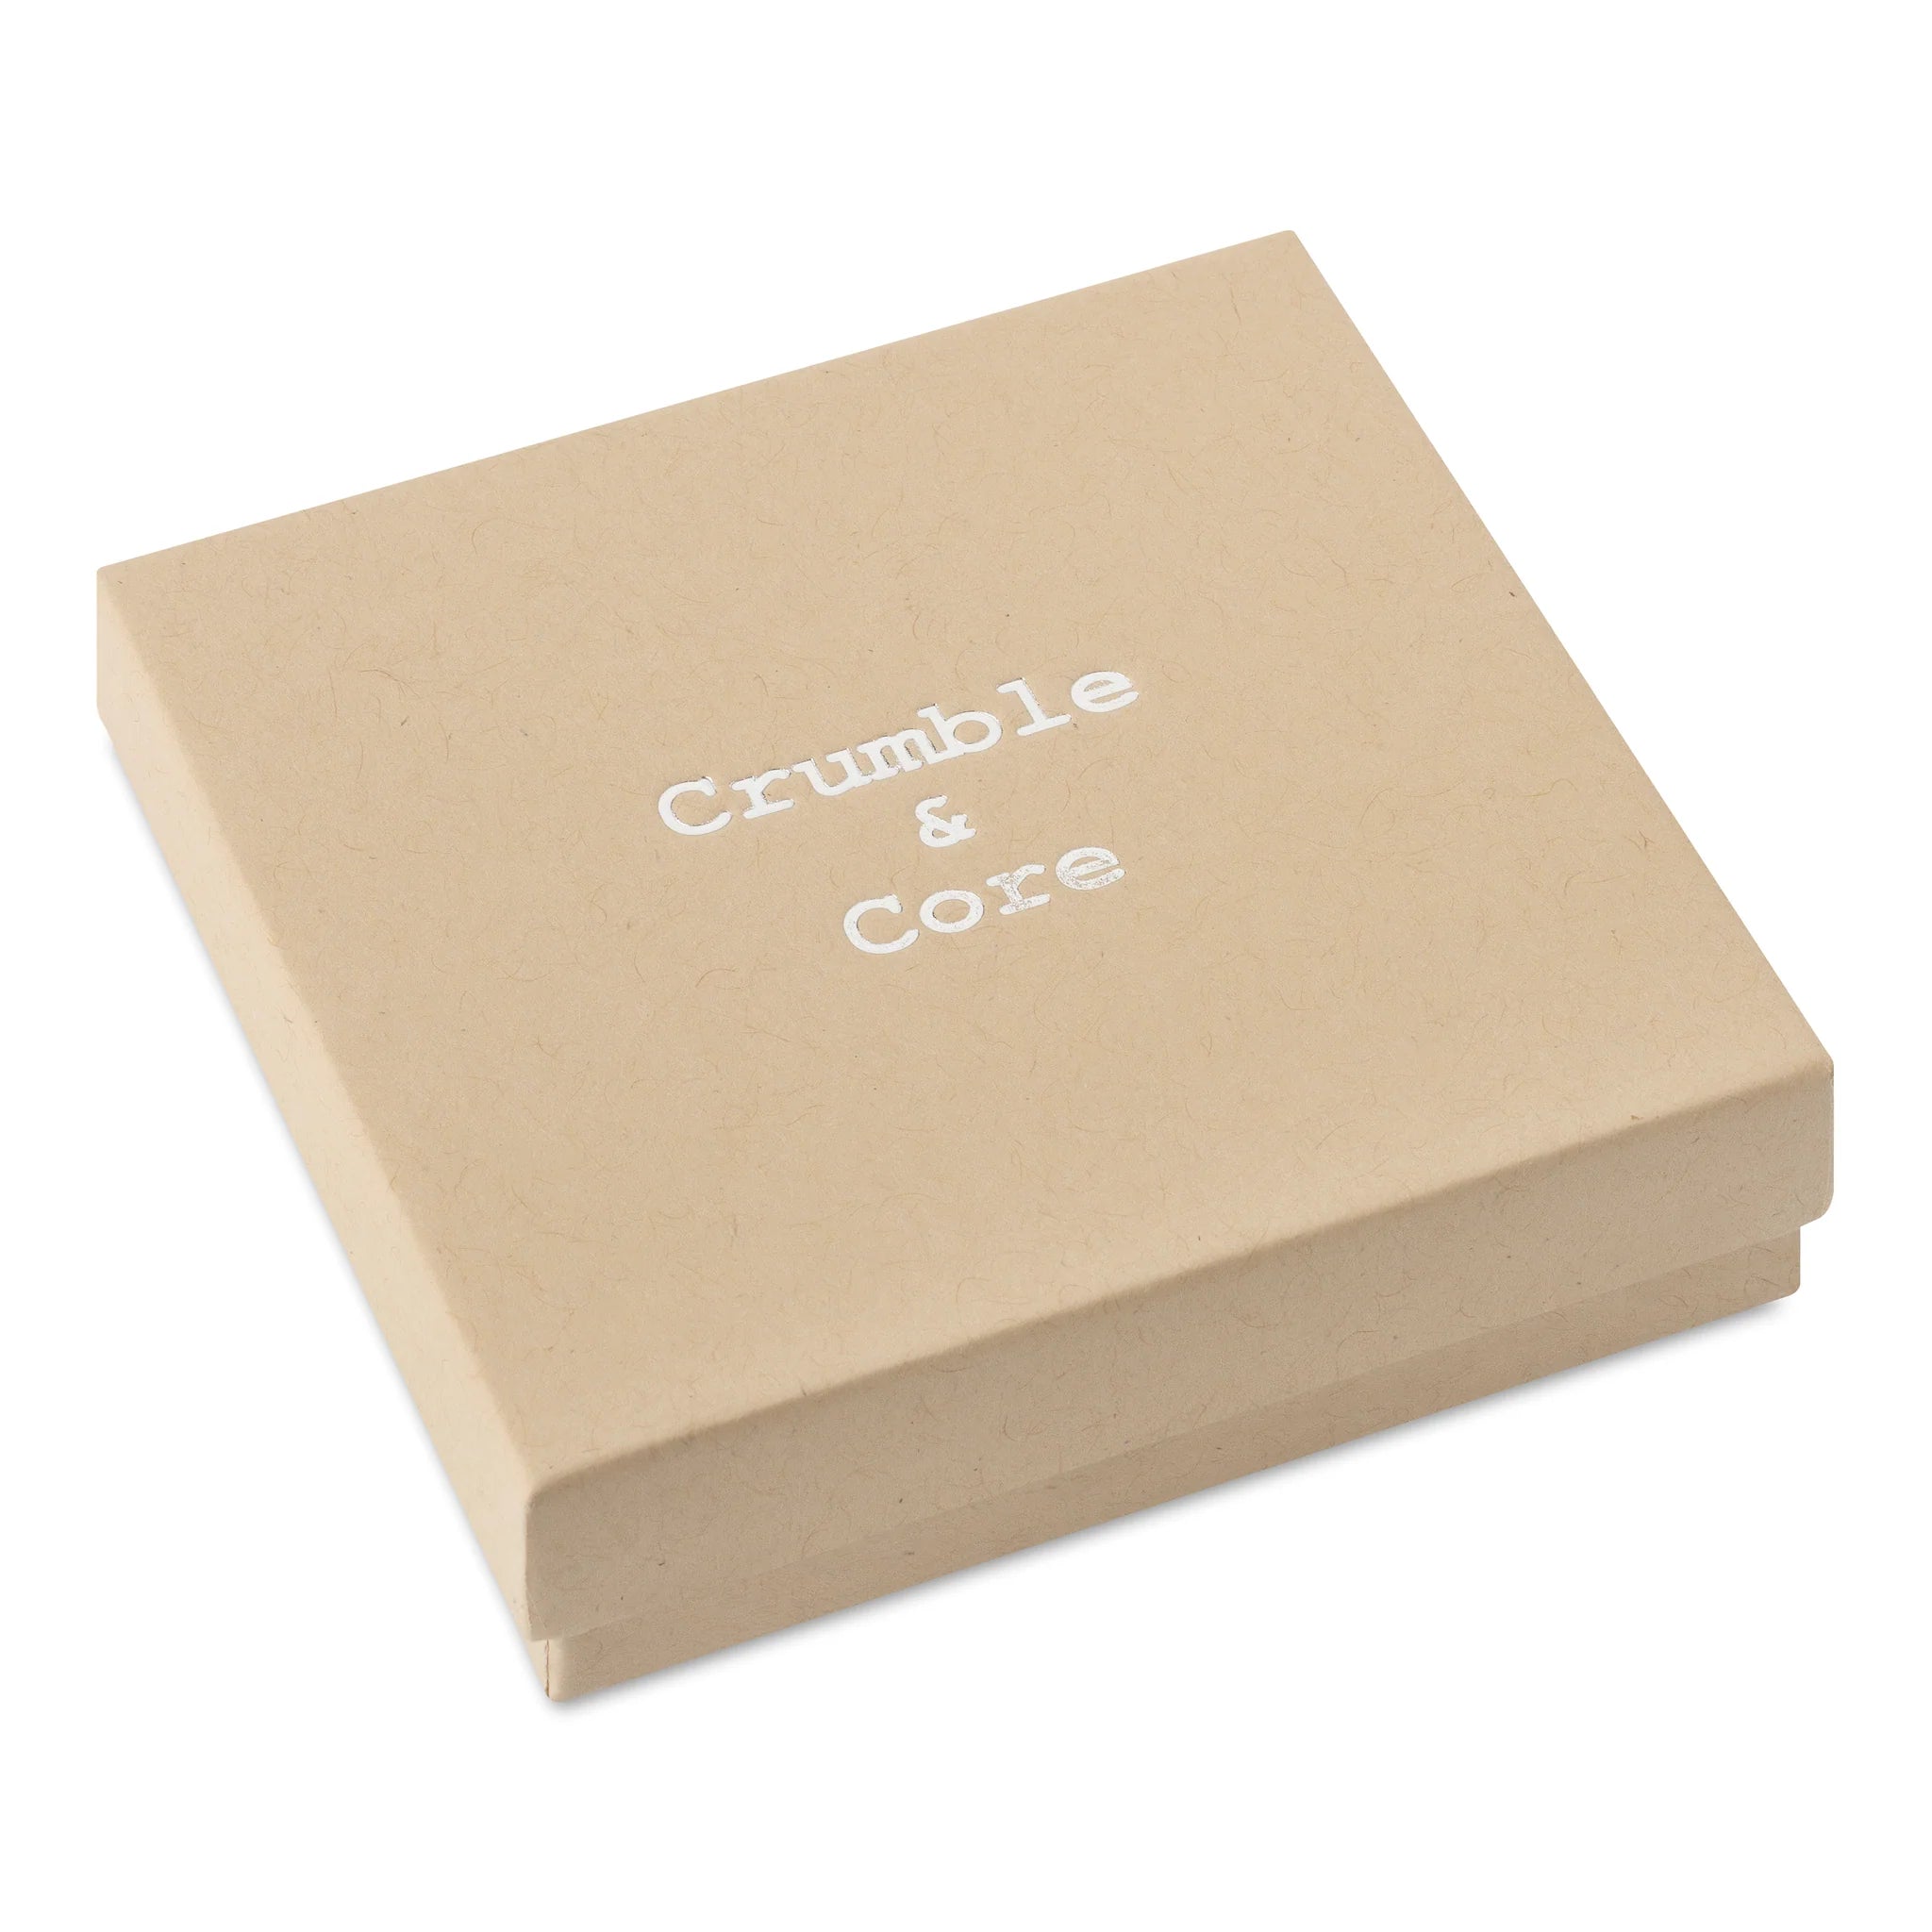 Crumble & Core Big Love Card with Earrings in a White Box